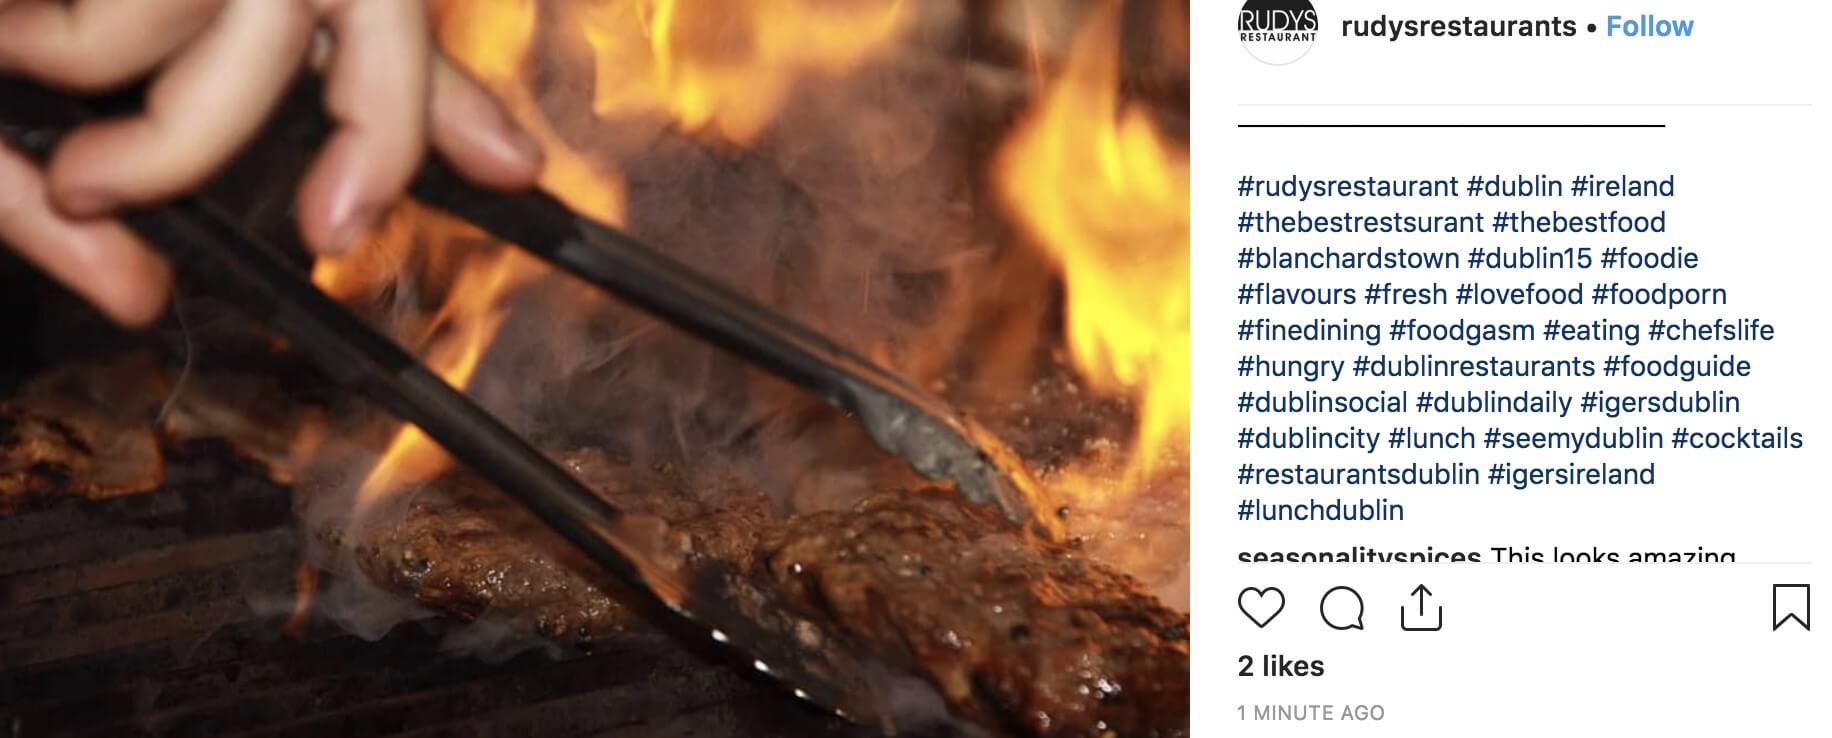 Carbon Free Dining - Instagram For Restaurants 8 Tips To Get More Diners